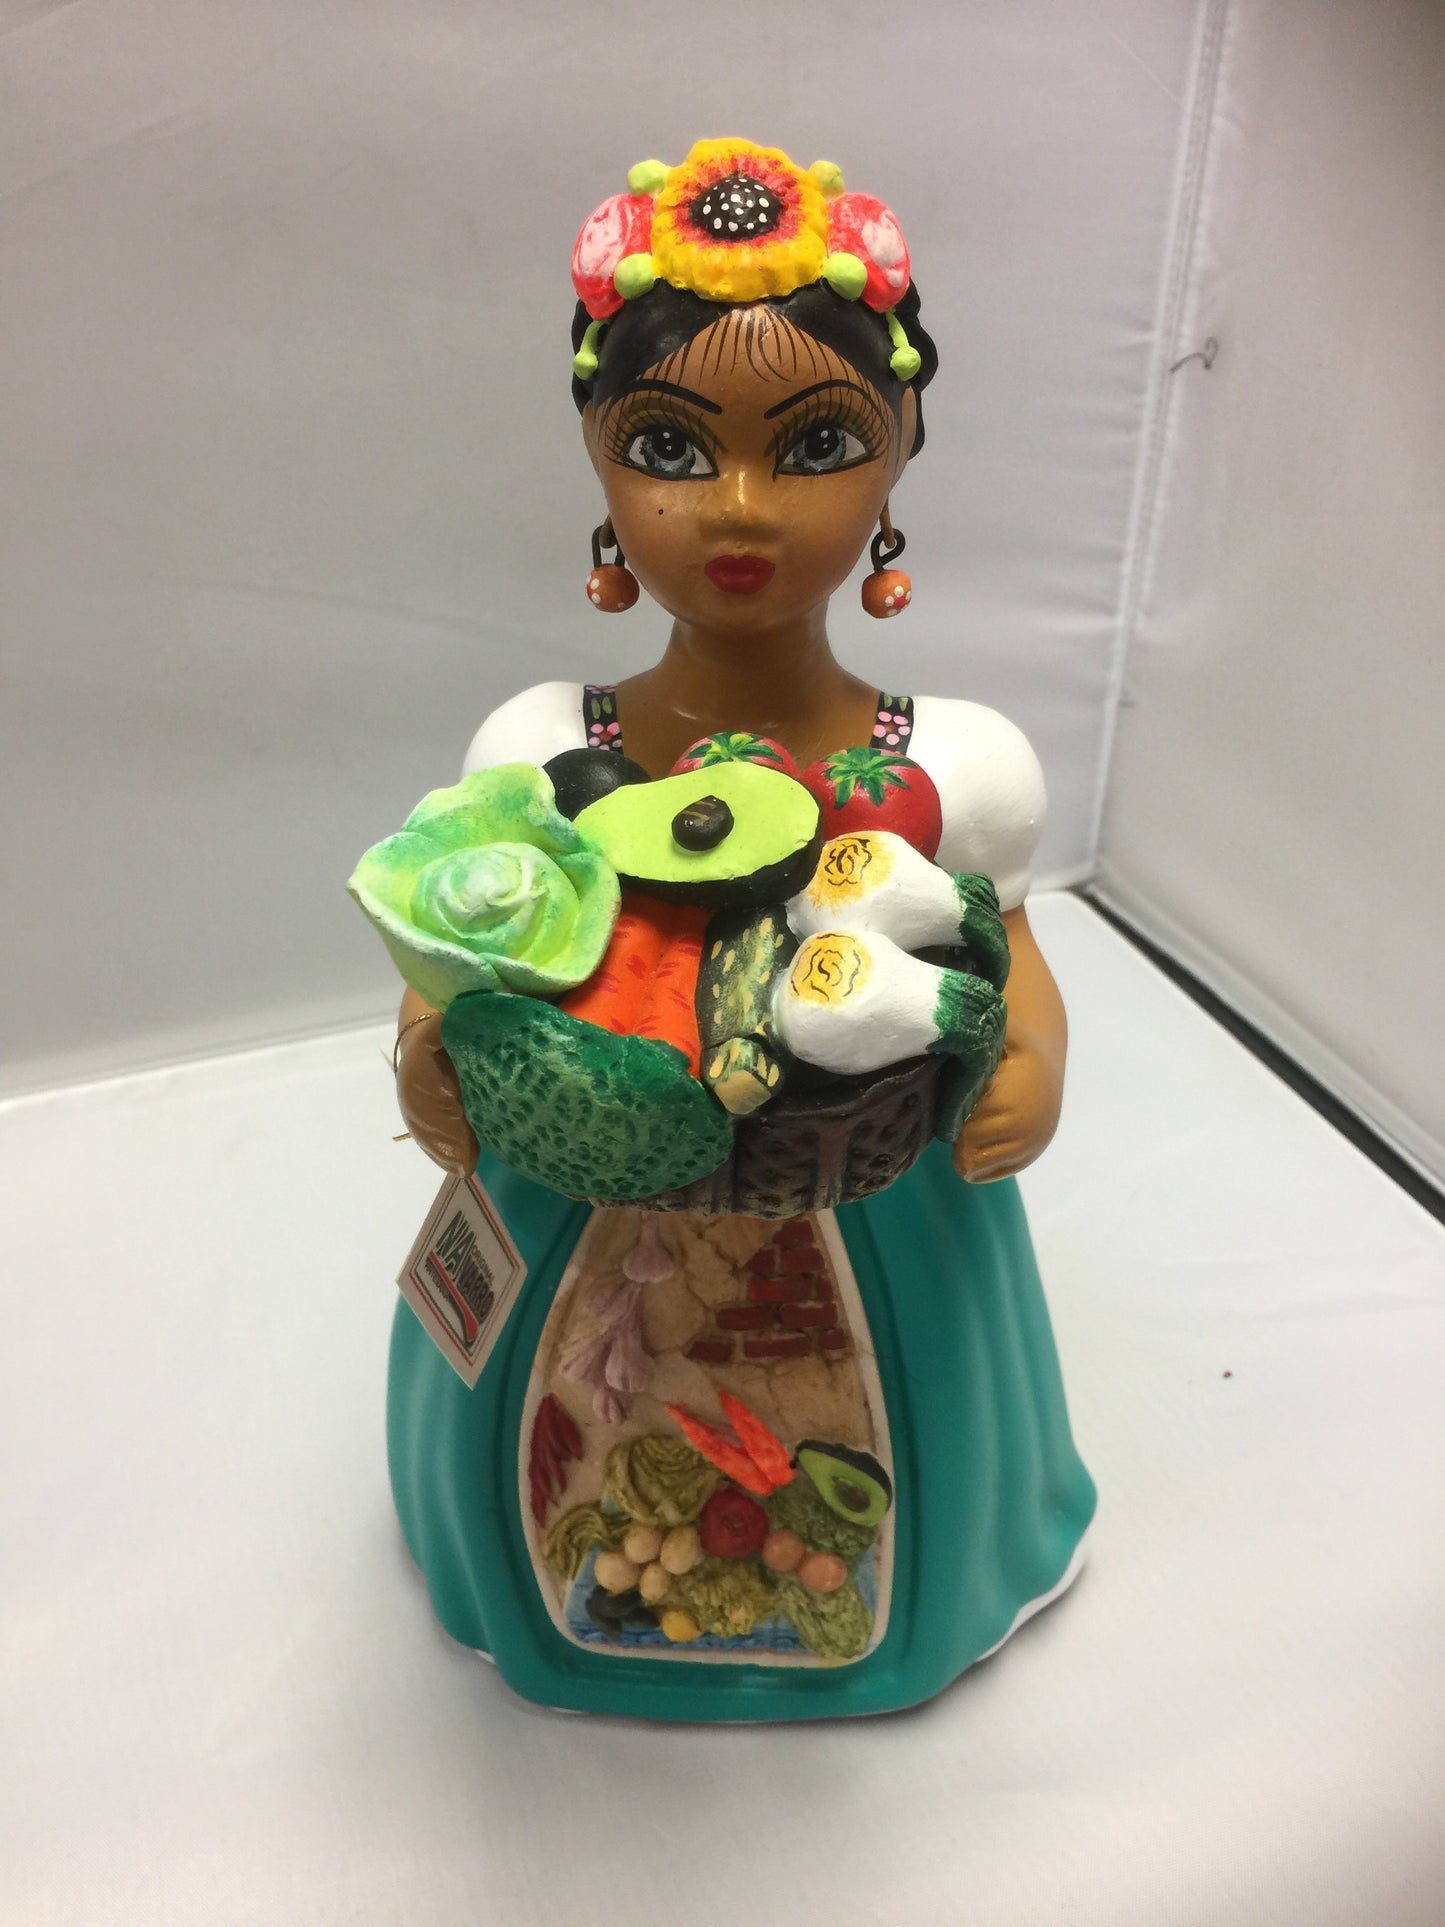 Lupita  Mexican Ceramic Doll  with  Vegetables Basket SOLD